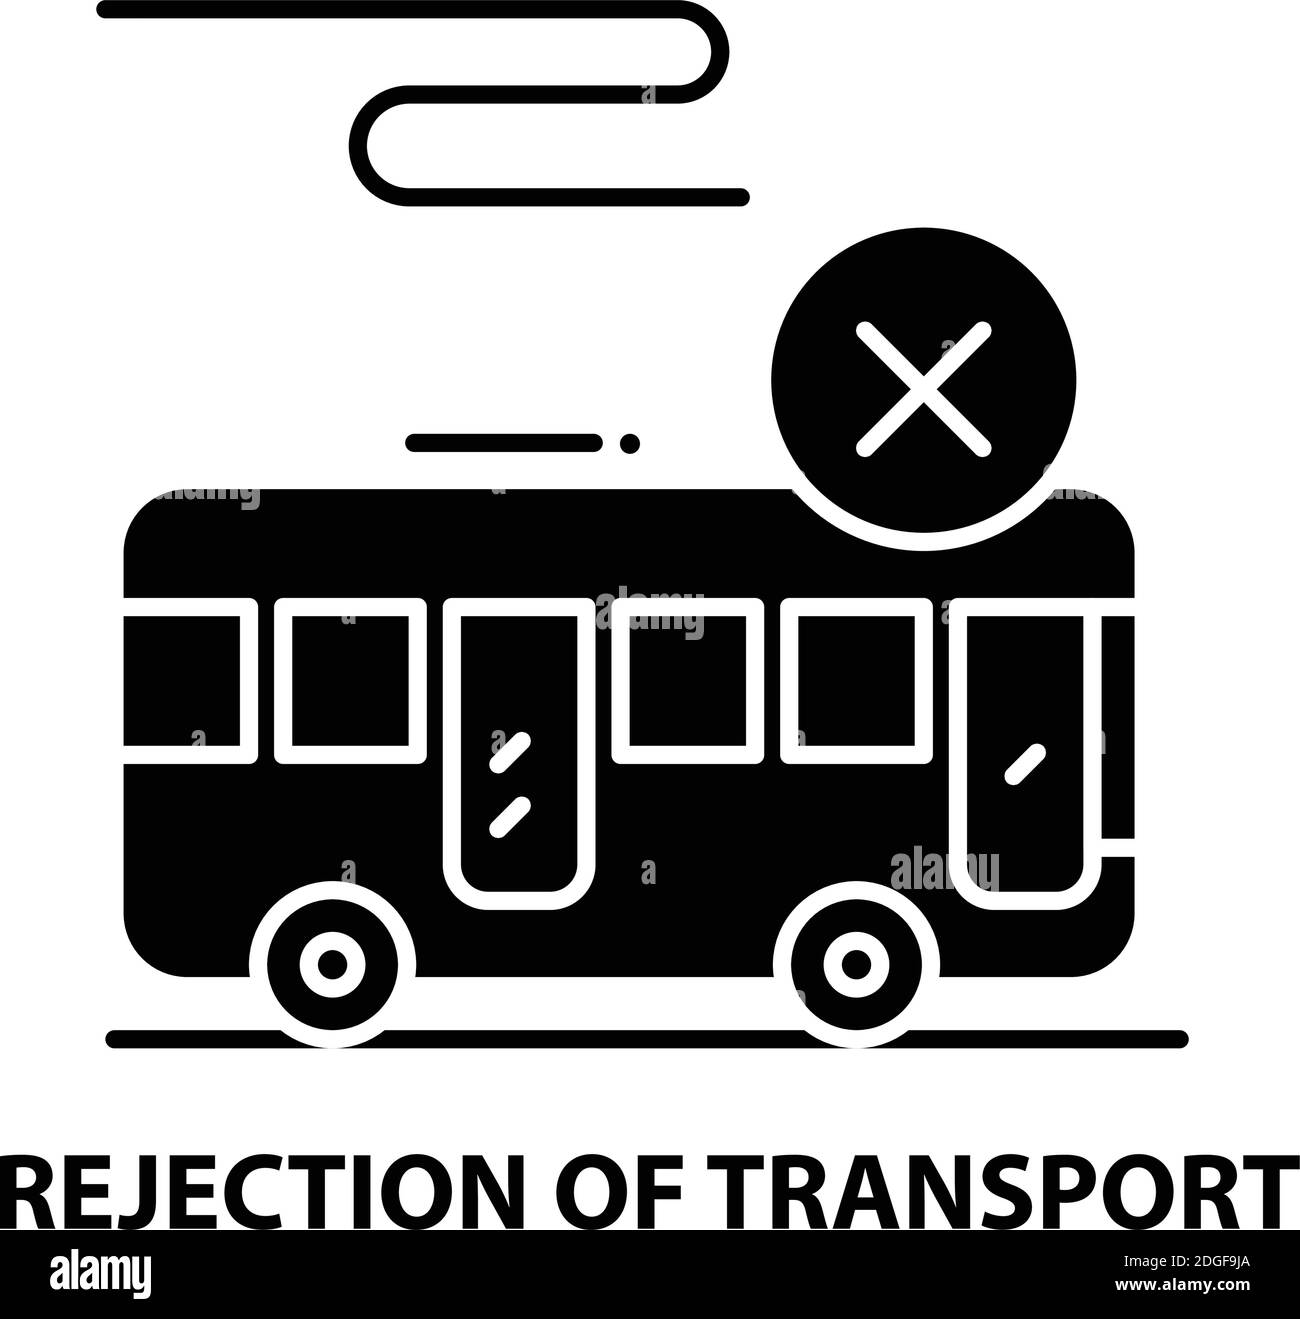 rejection of transport icon, black vector sign with editable strokes, concept illustration Stock Vector